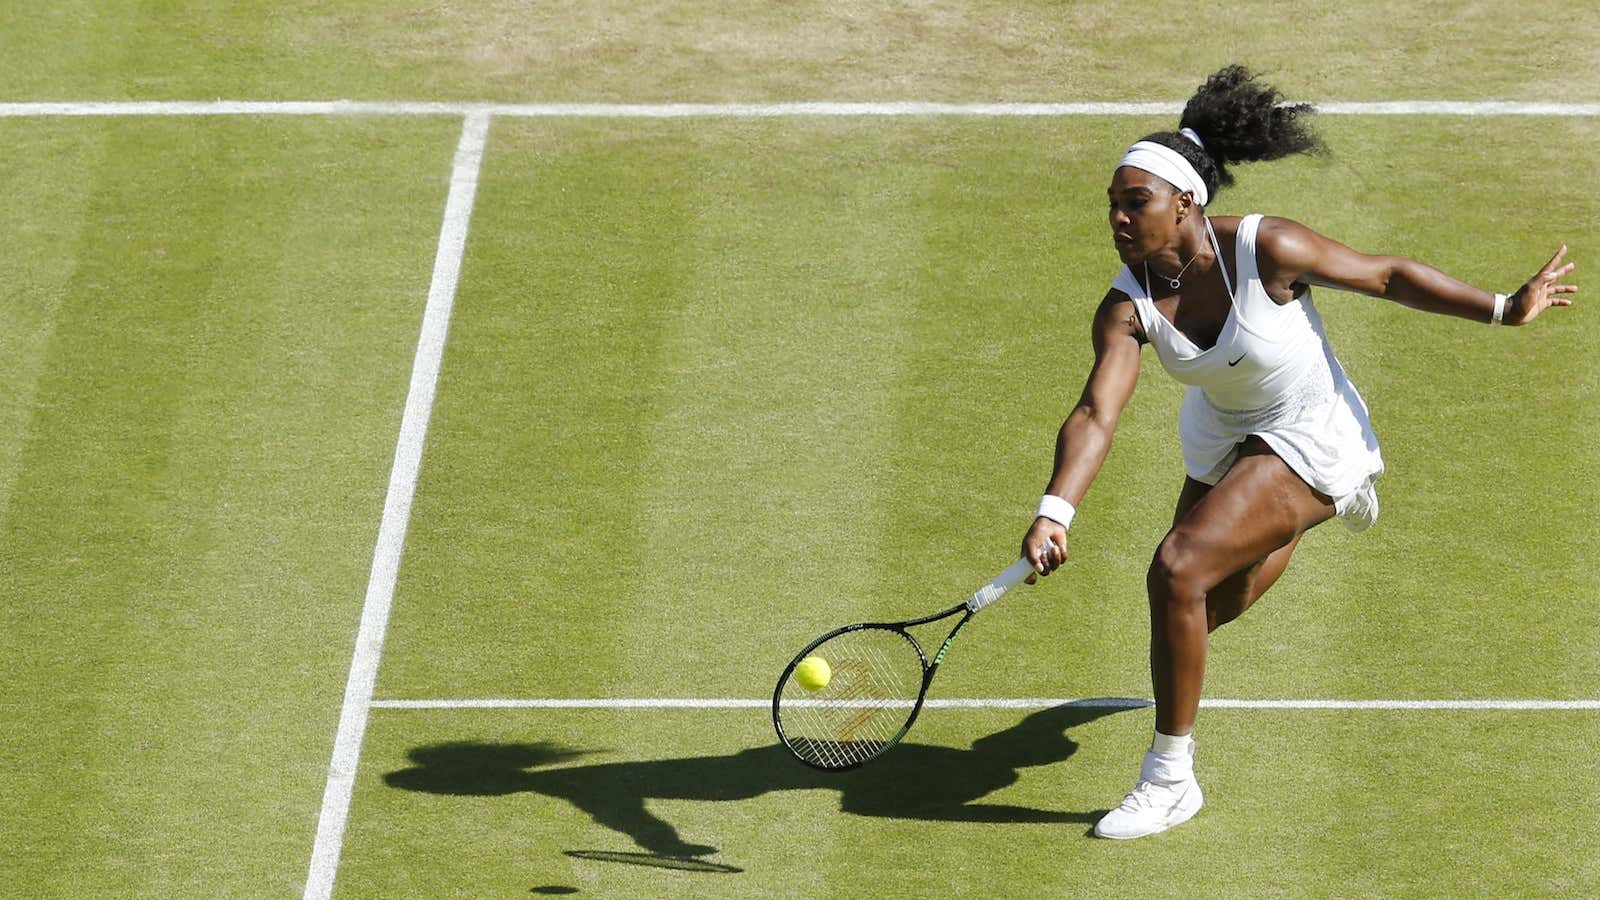 Williams has demonstrated herself to be the superior athlete time and time again. Why do we continue to demand proof?